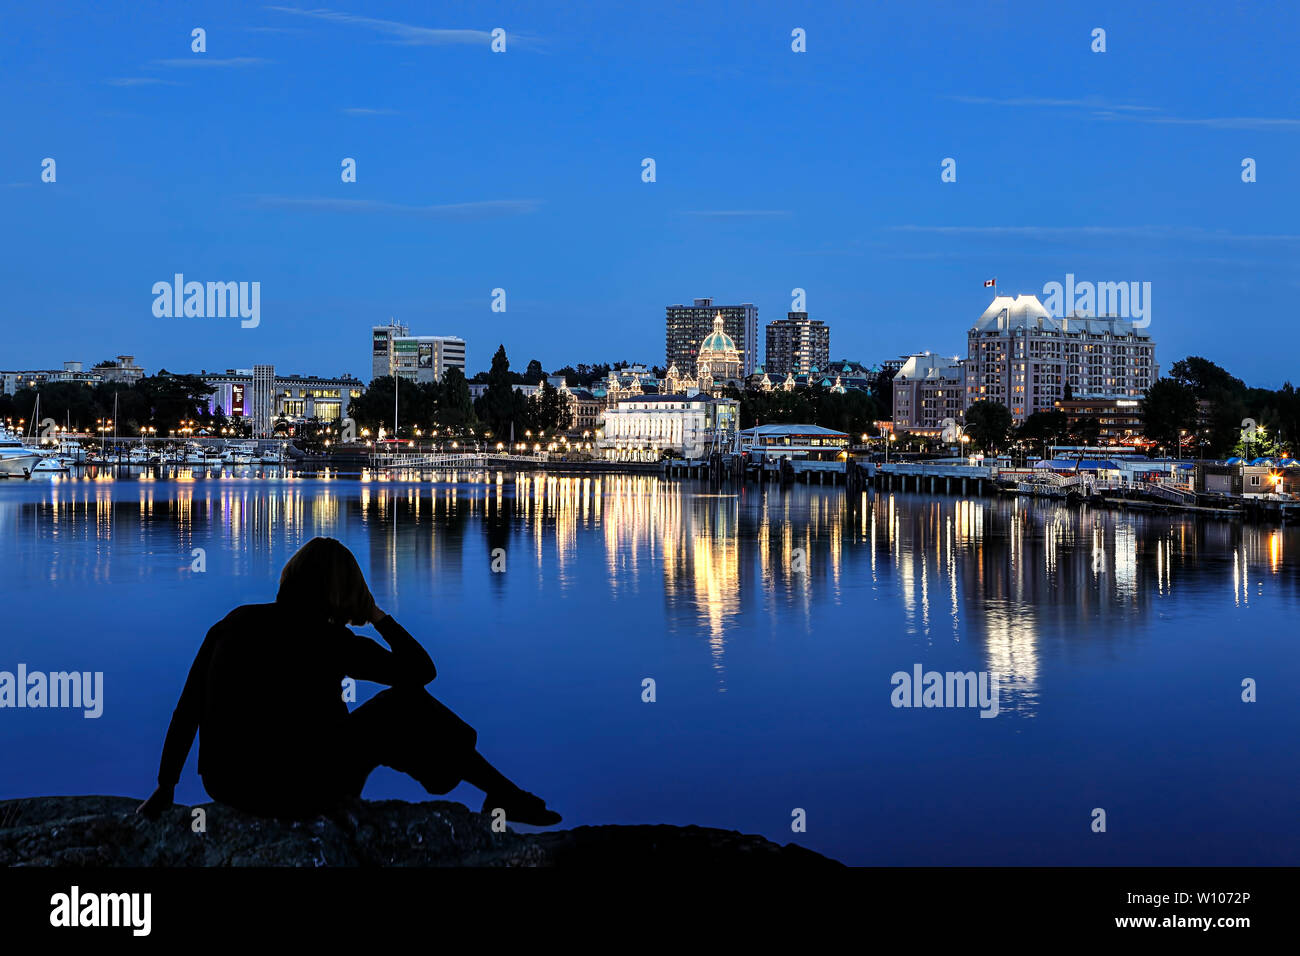 Overlooking the inner harbor at dusk in Victoria BC, Canada. Stock Photo